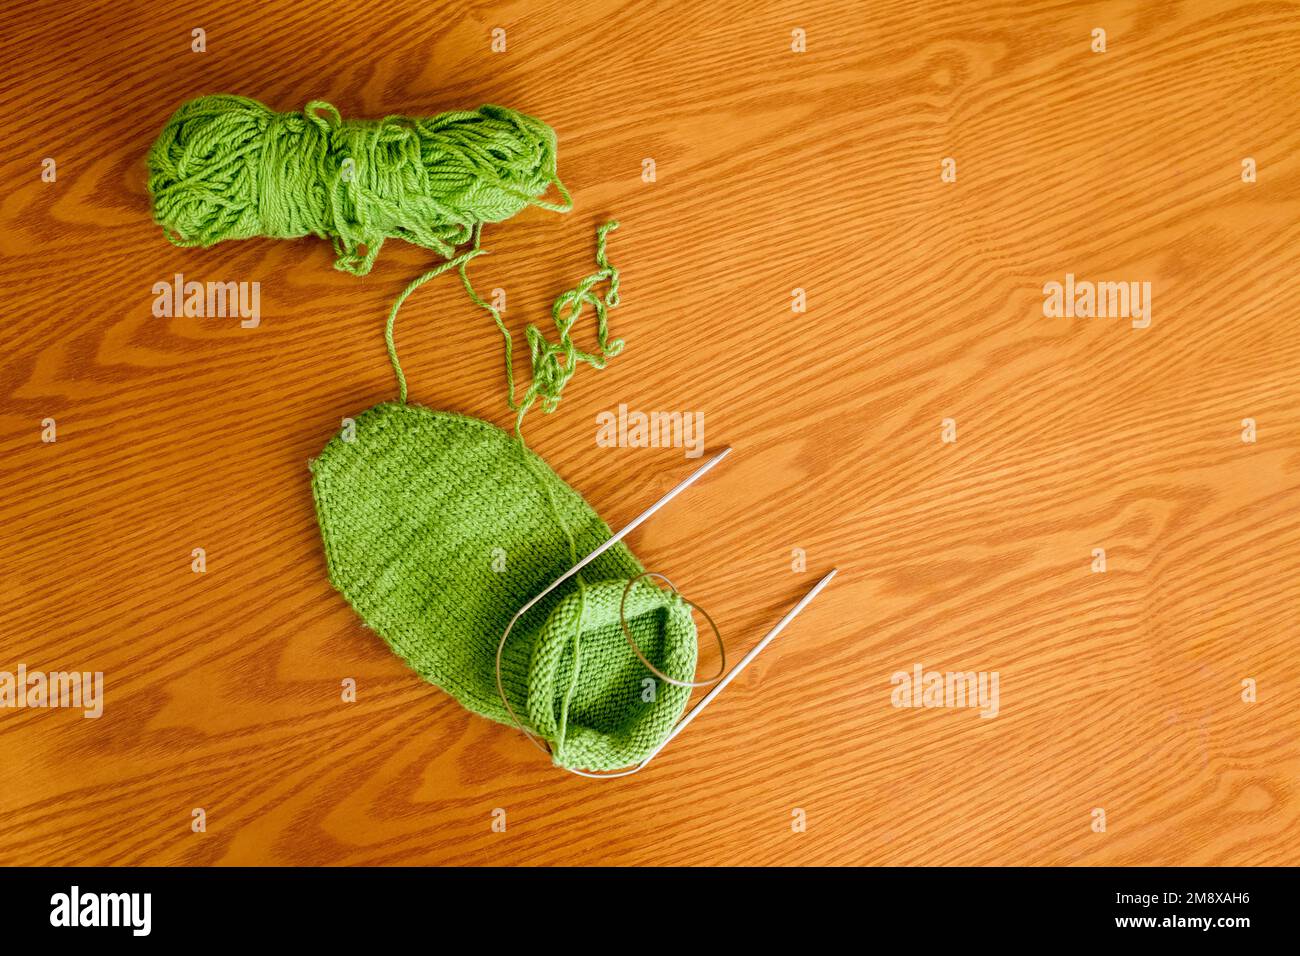 Knitted sock, ball of yarn and circular knitting needles on a wooden table surface. Top view with copy space. Stock Photo